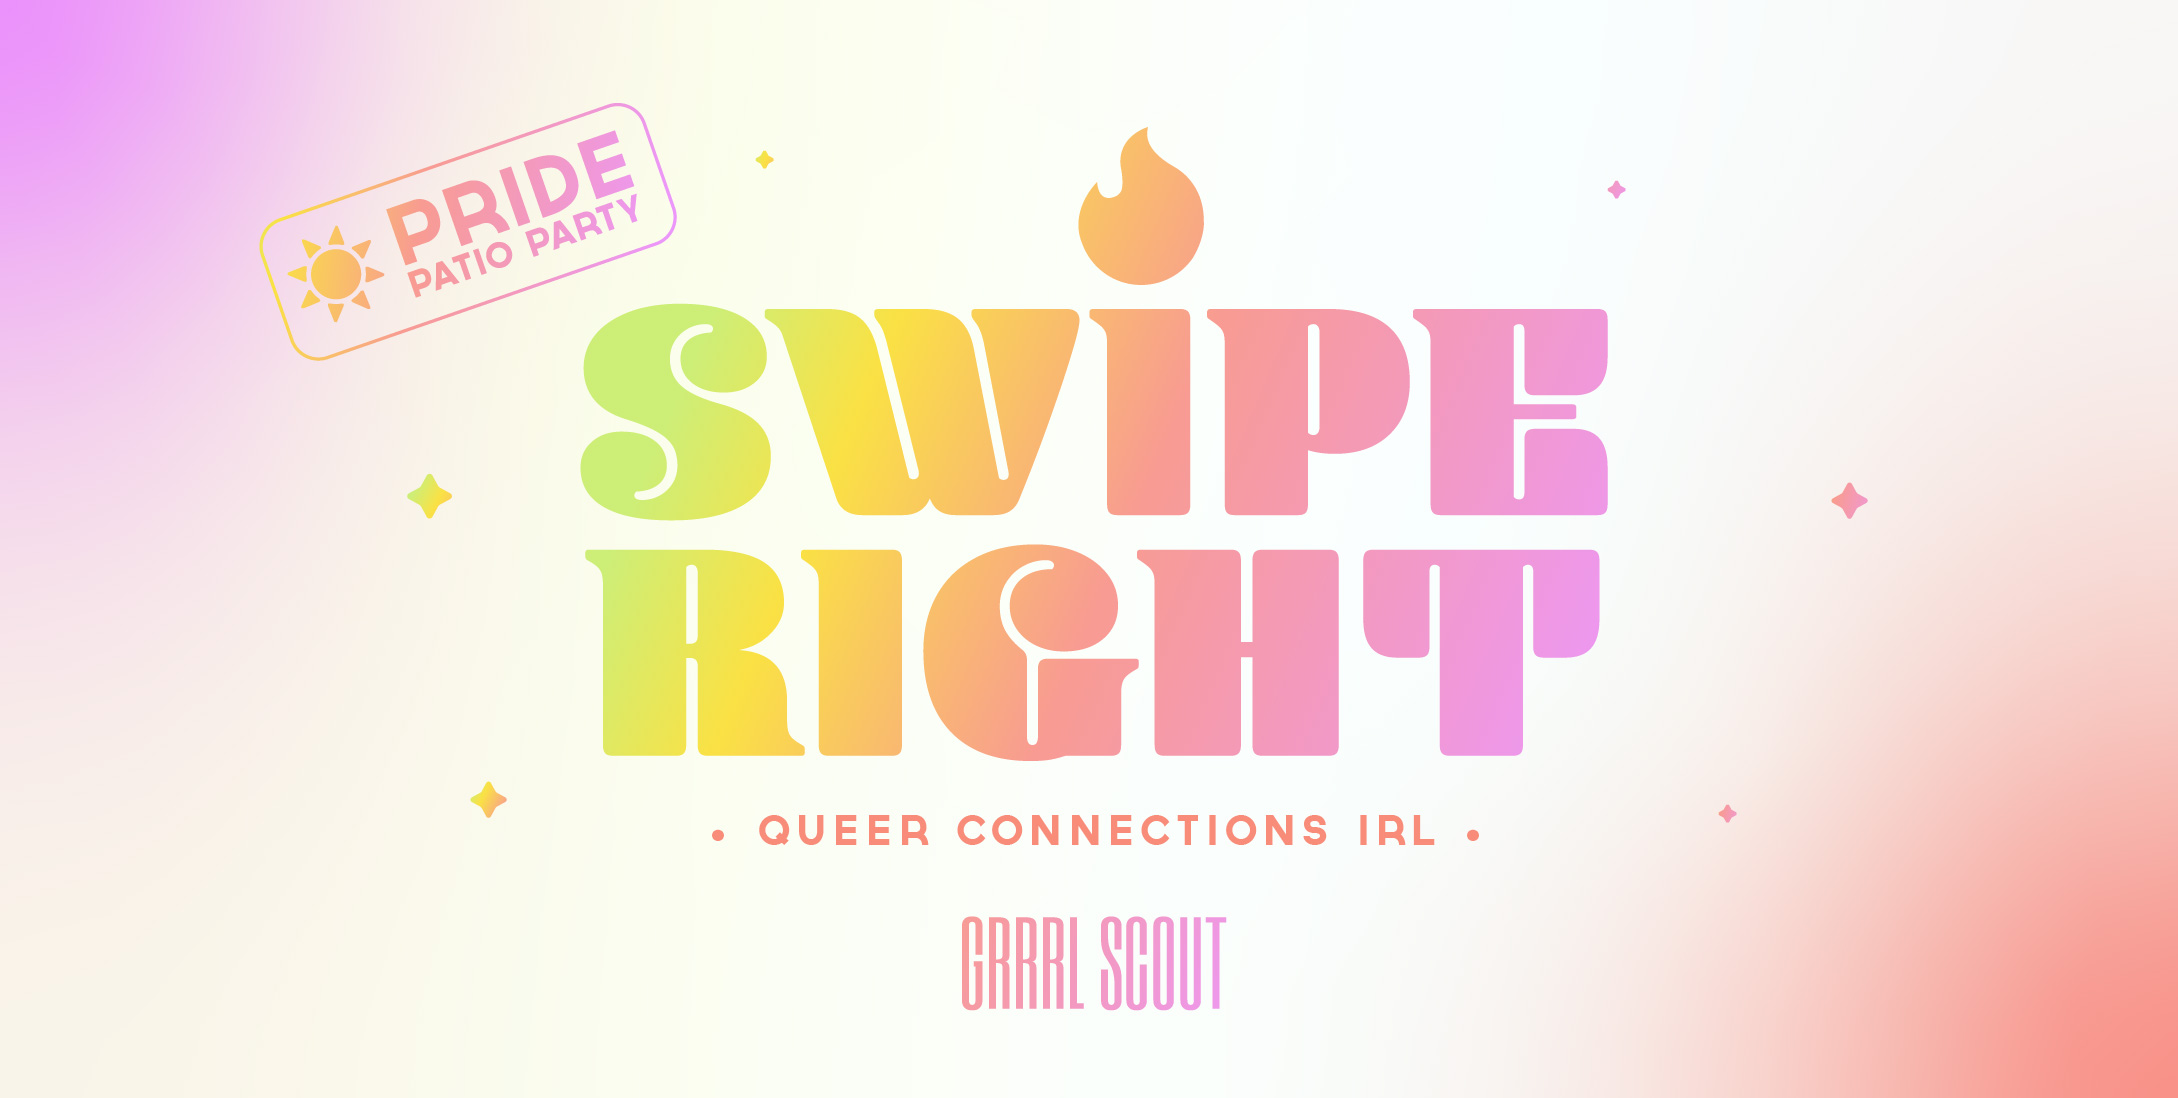 Swipe Right - Queer Connections IRL PATIO PARTY EDITION Wednesday, May 25 7-11pm :: 21+ $10 EARLY / $14 ADV / $20 DOS